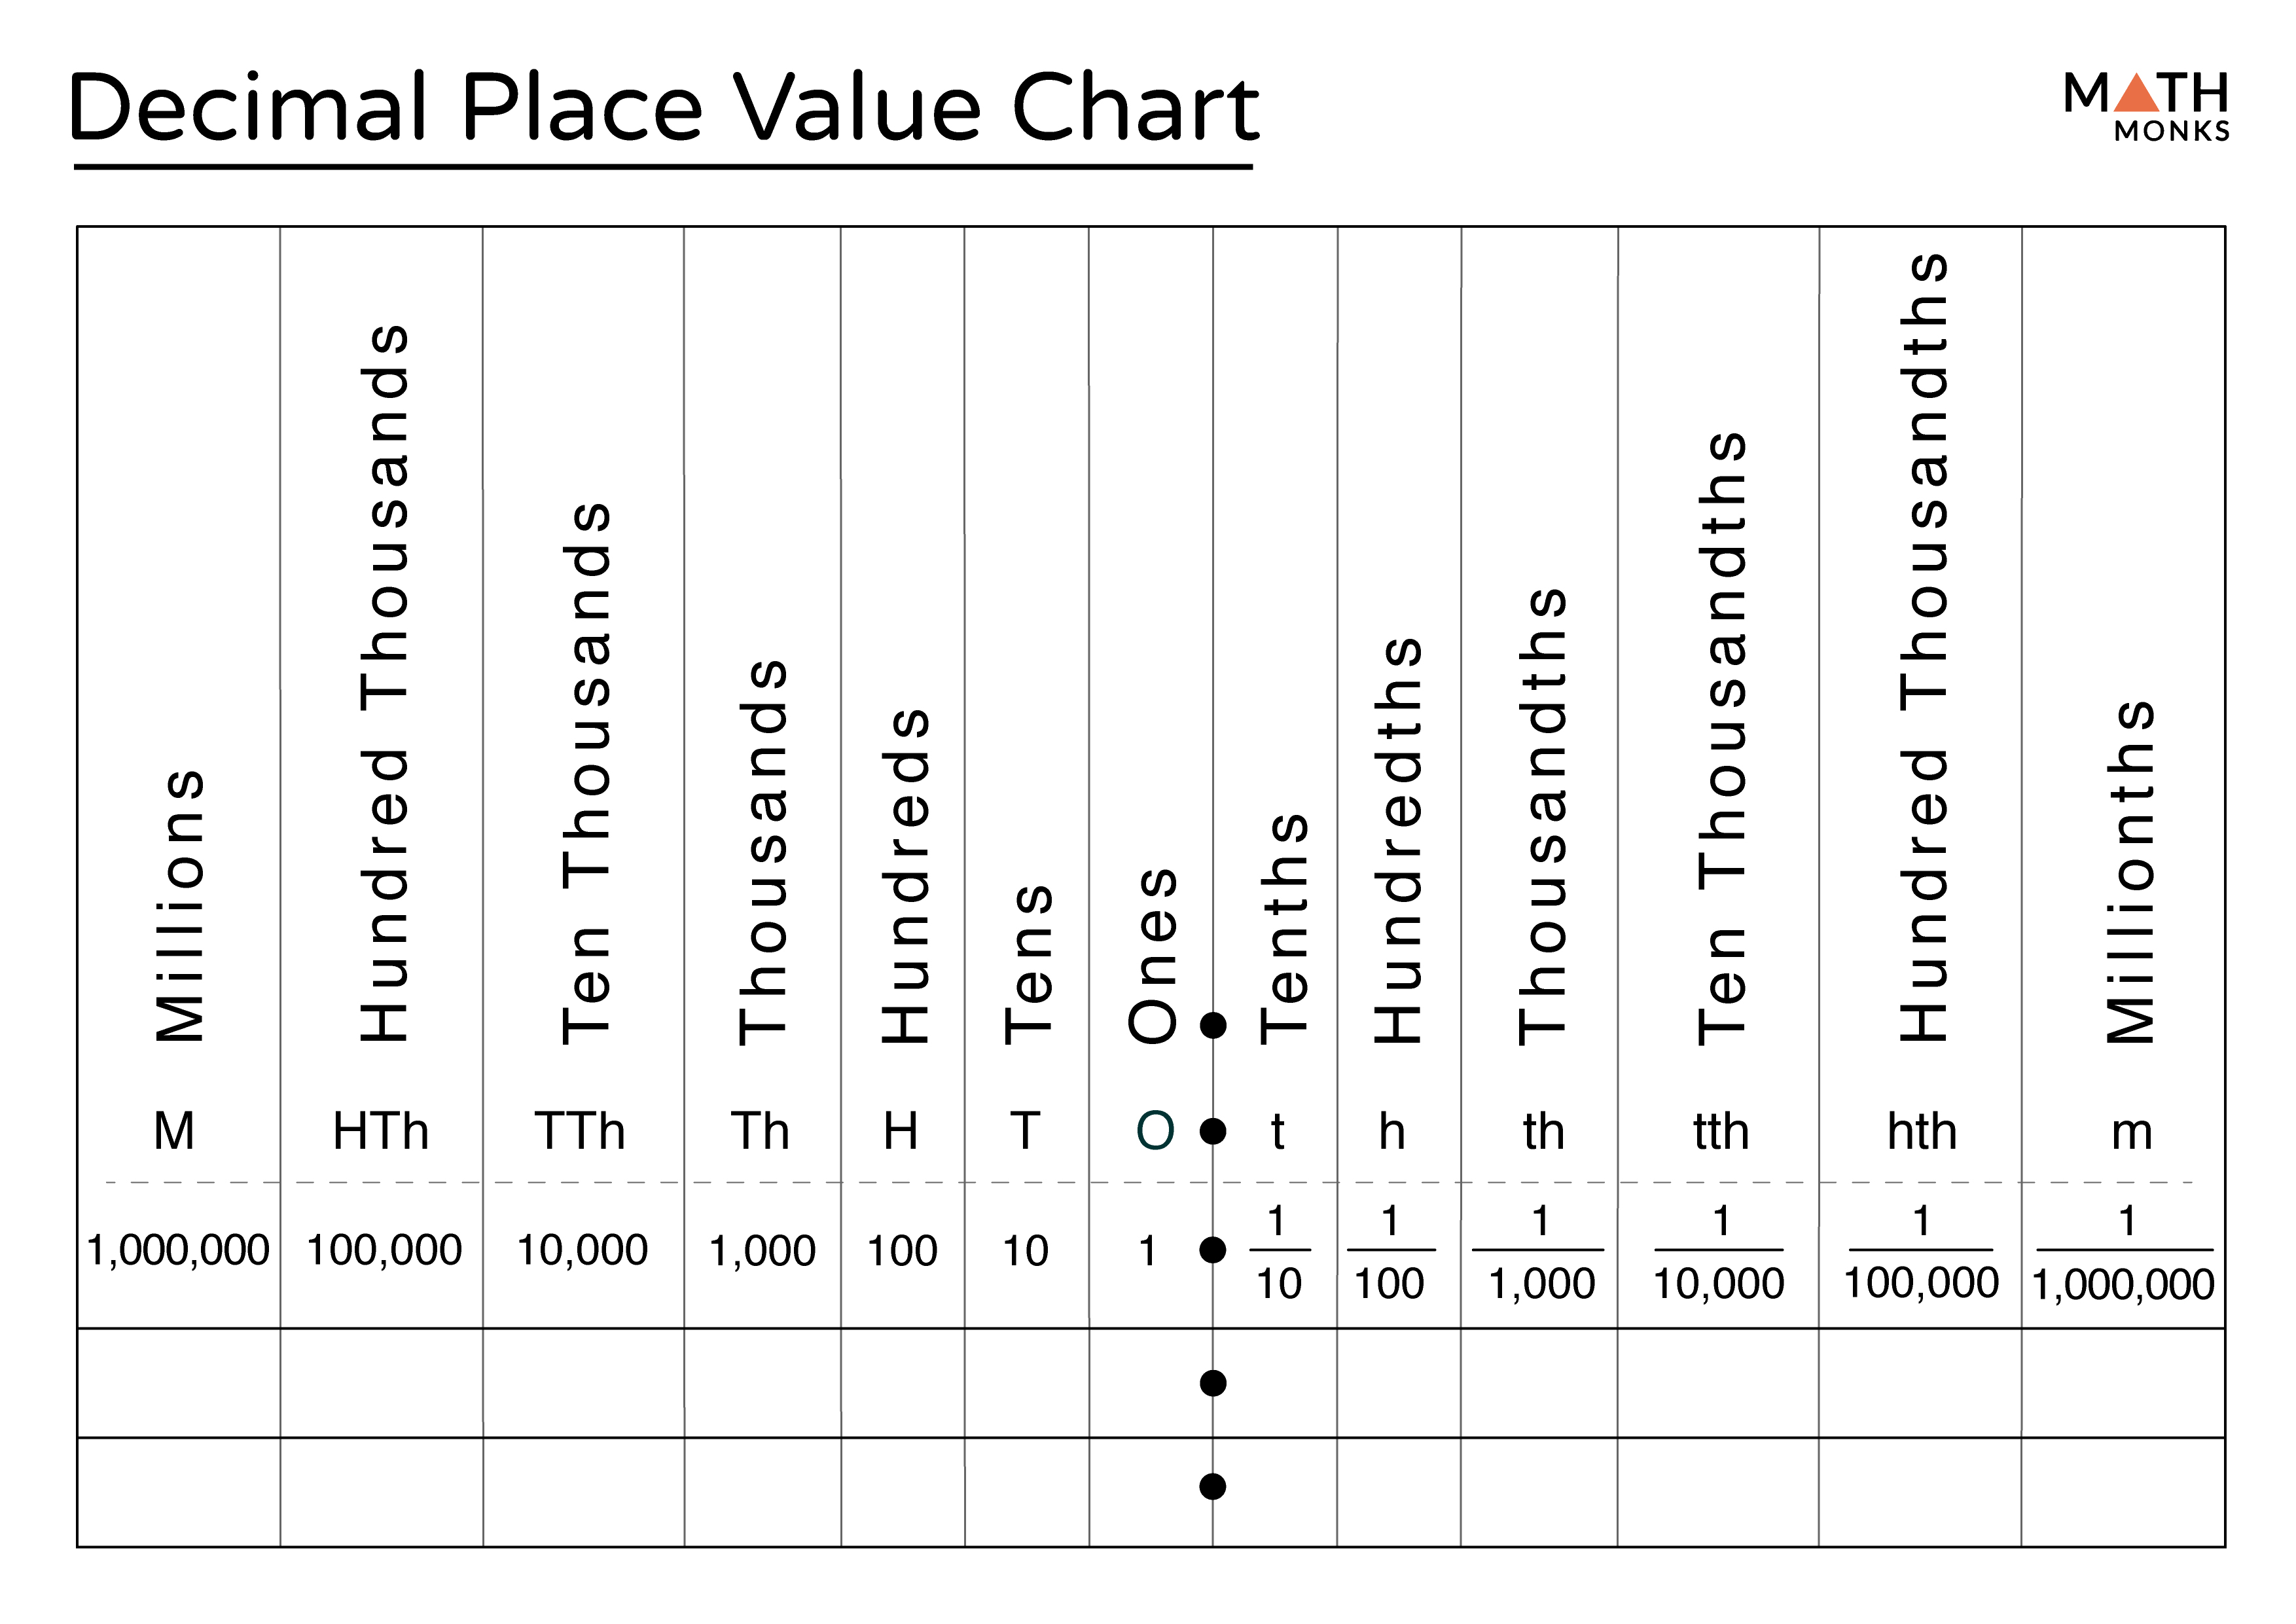 decimal-place-value-definition-chart-examples